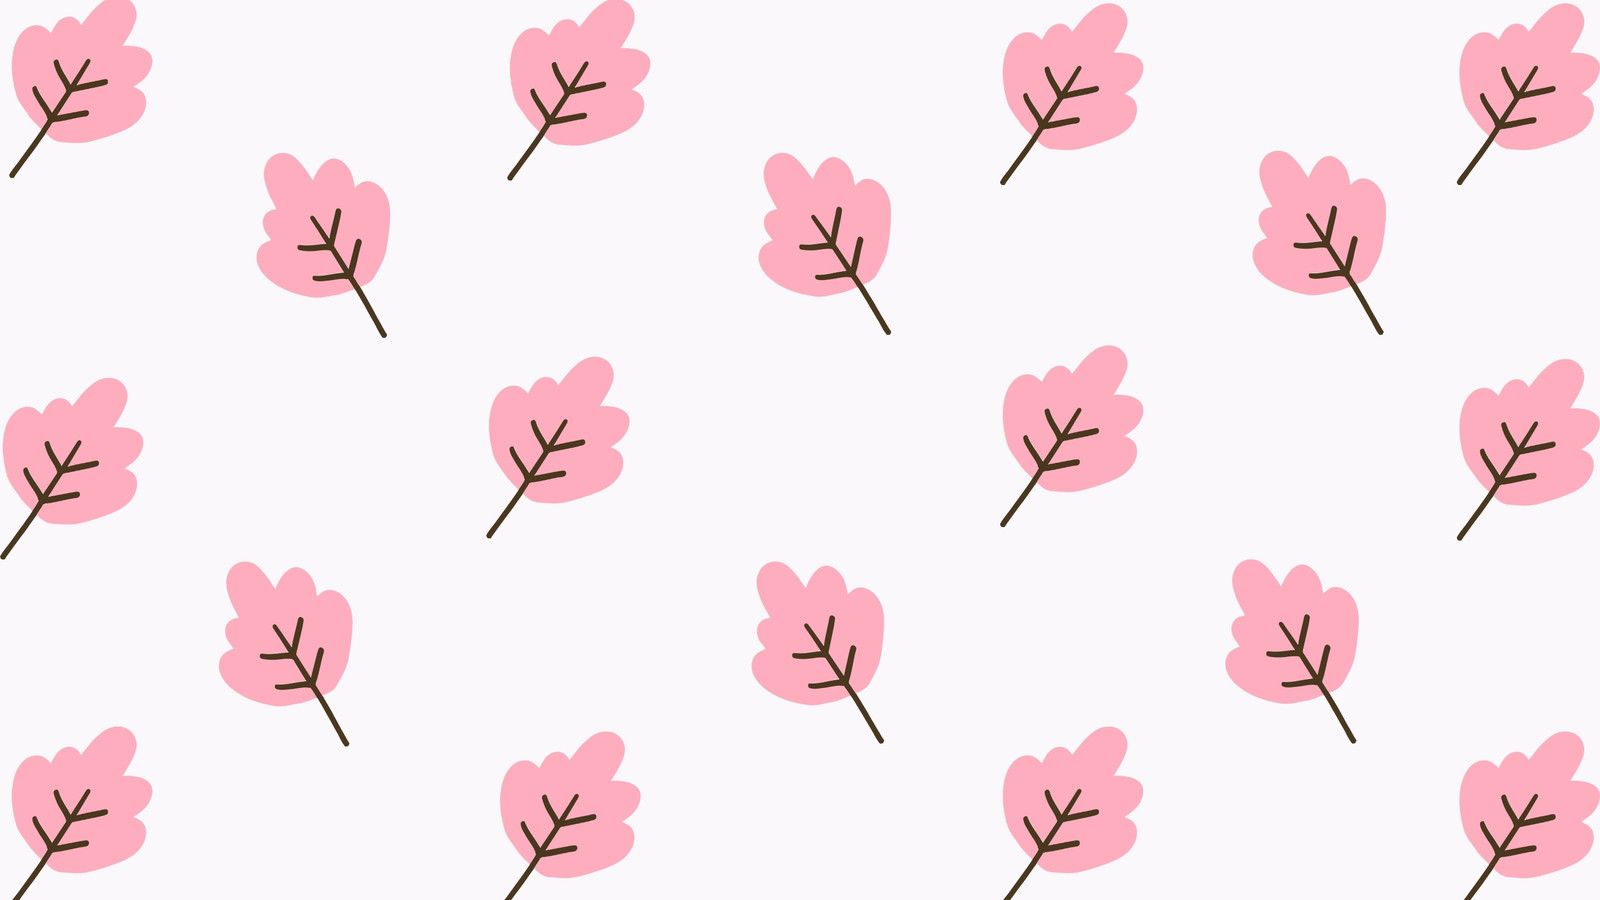 A pattern of pink leaves on a white background - Cute fall